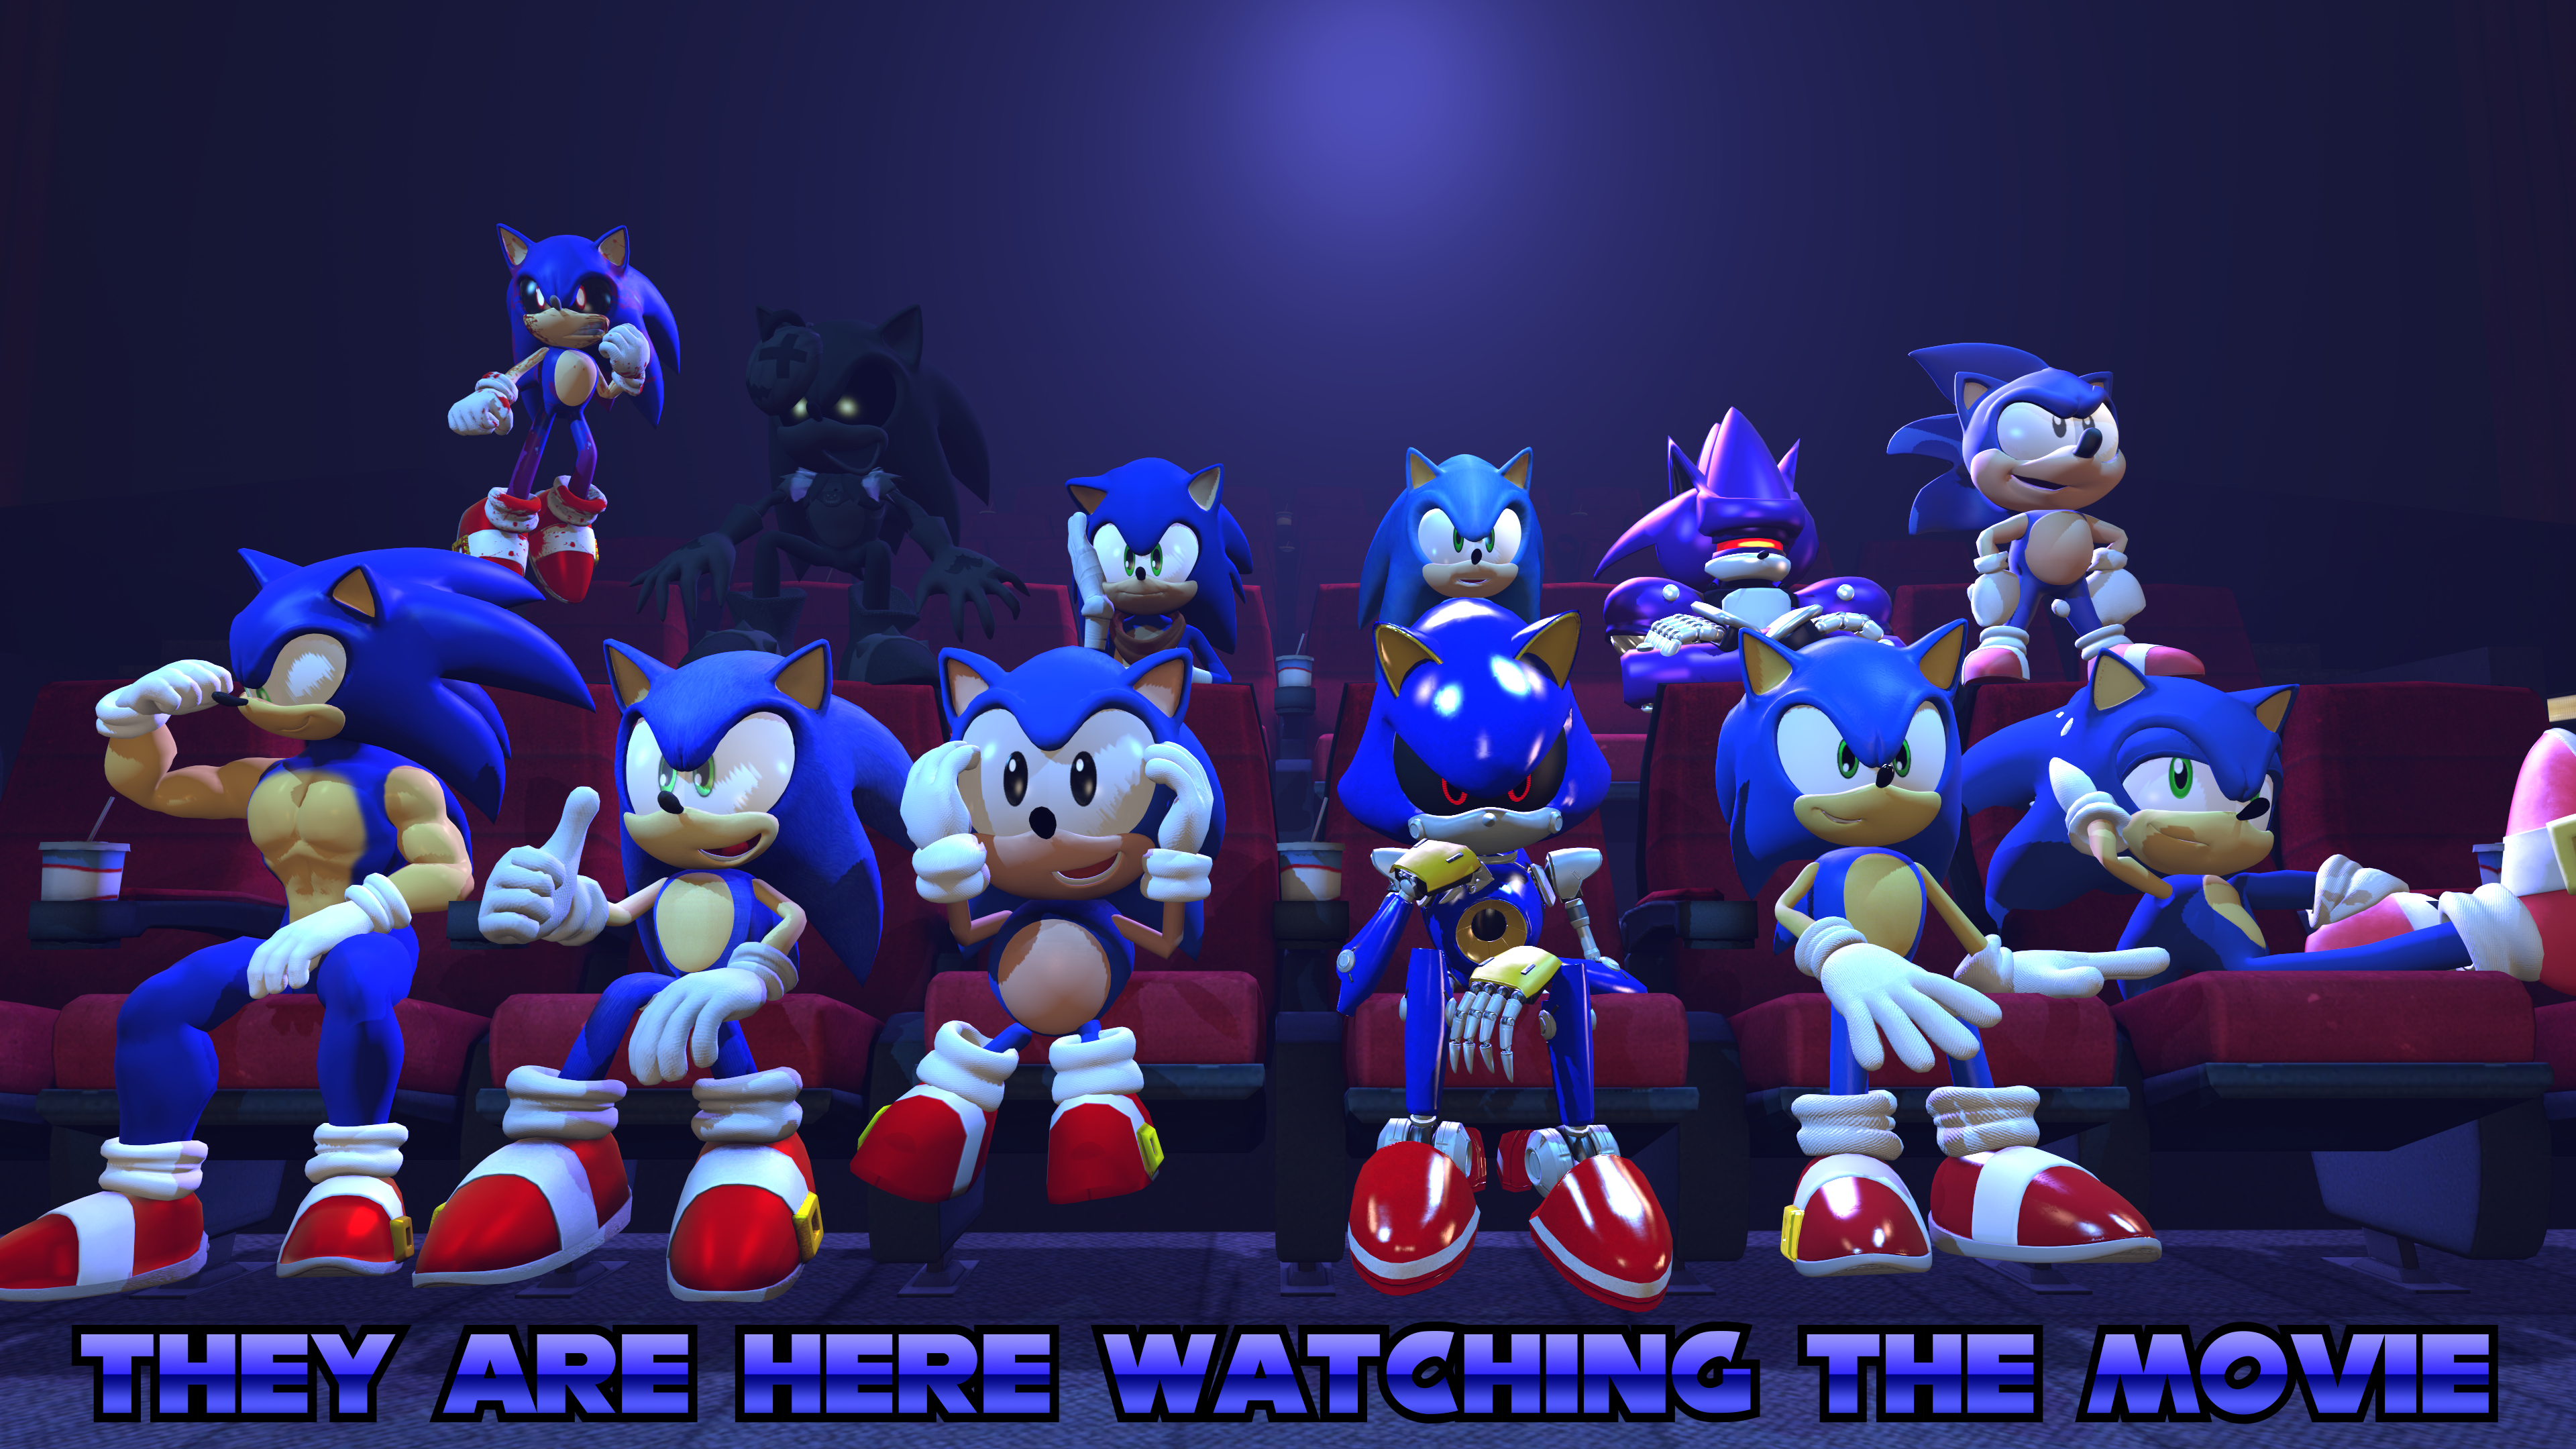 Sonic the Hedgehog 2006 cover, Movie edition by DanielVieiraBr2020 on  DeviantArt